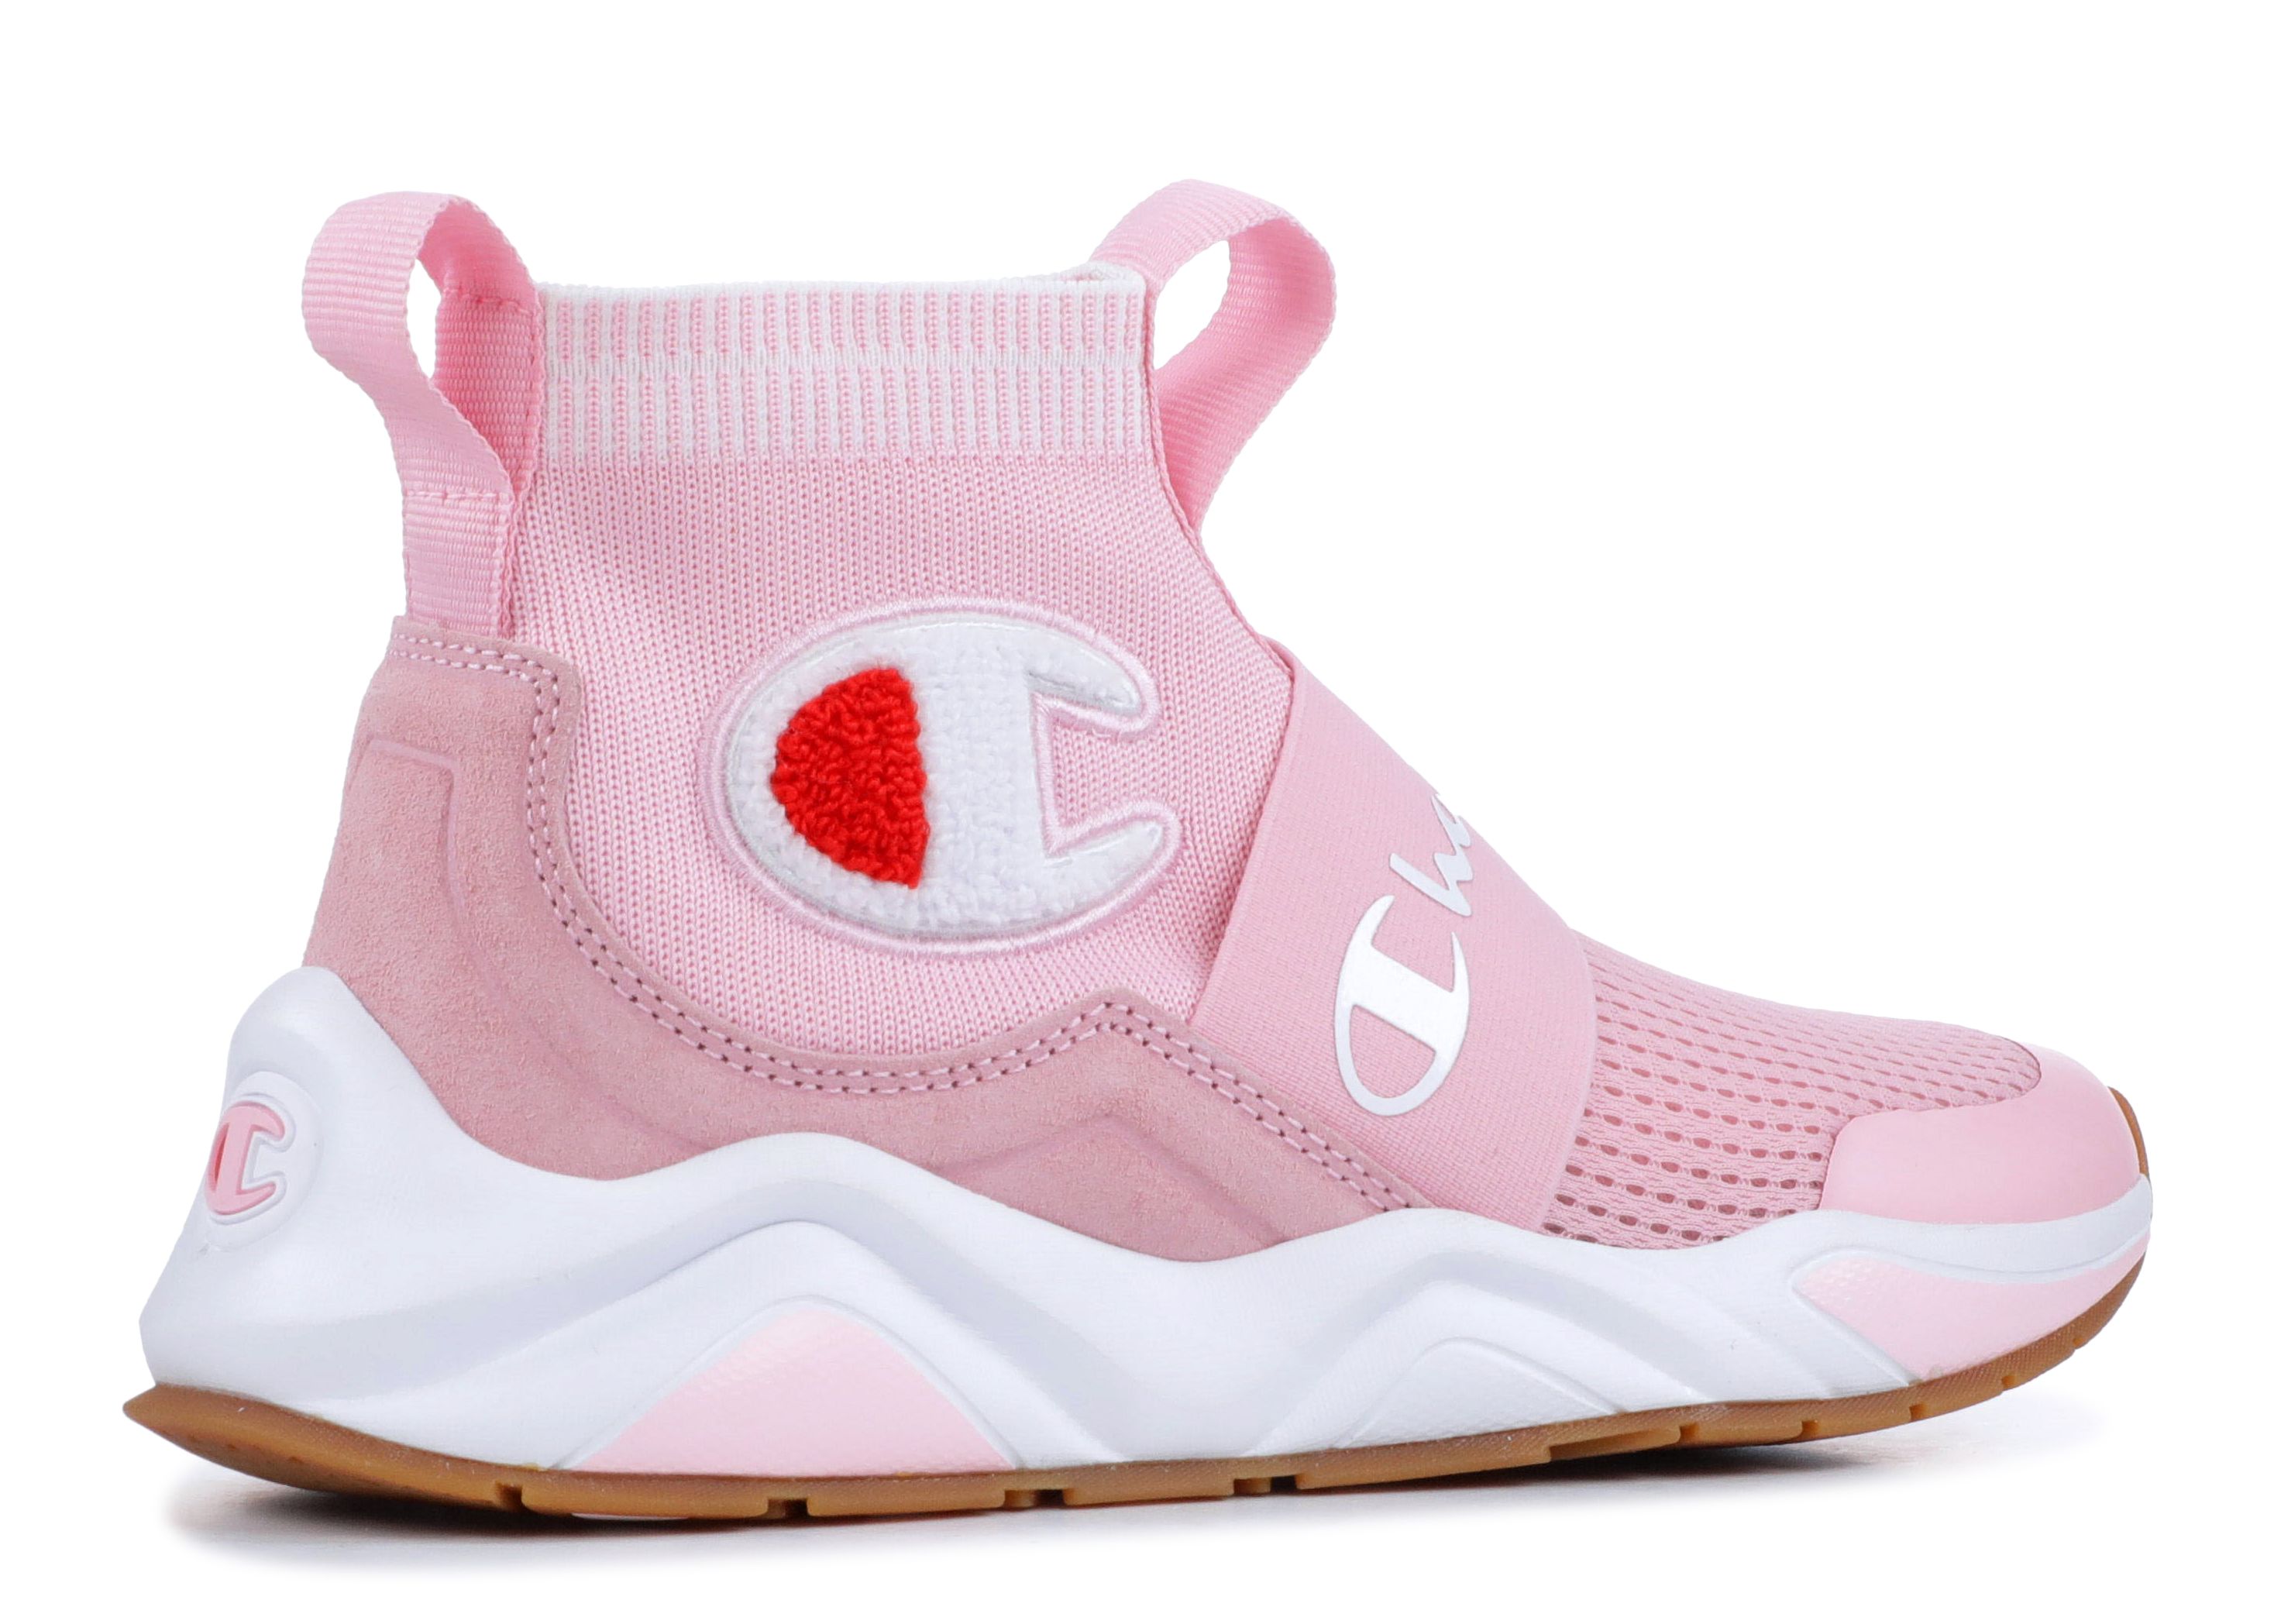 champion rally pro shoes pink